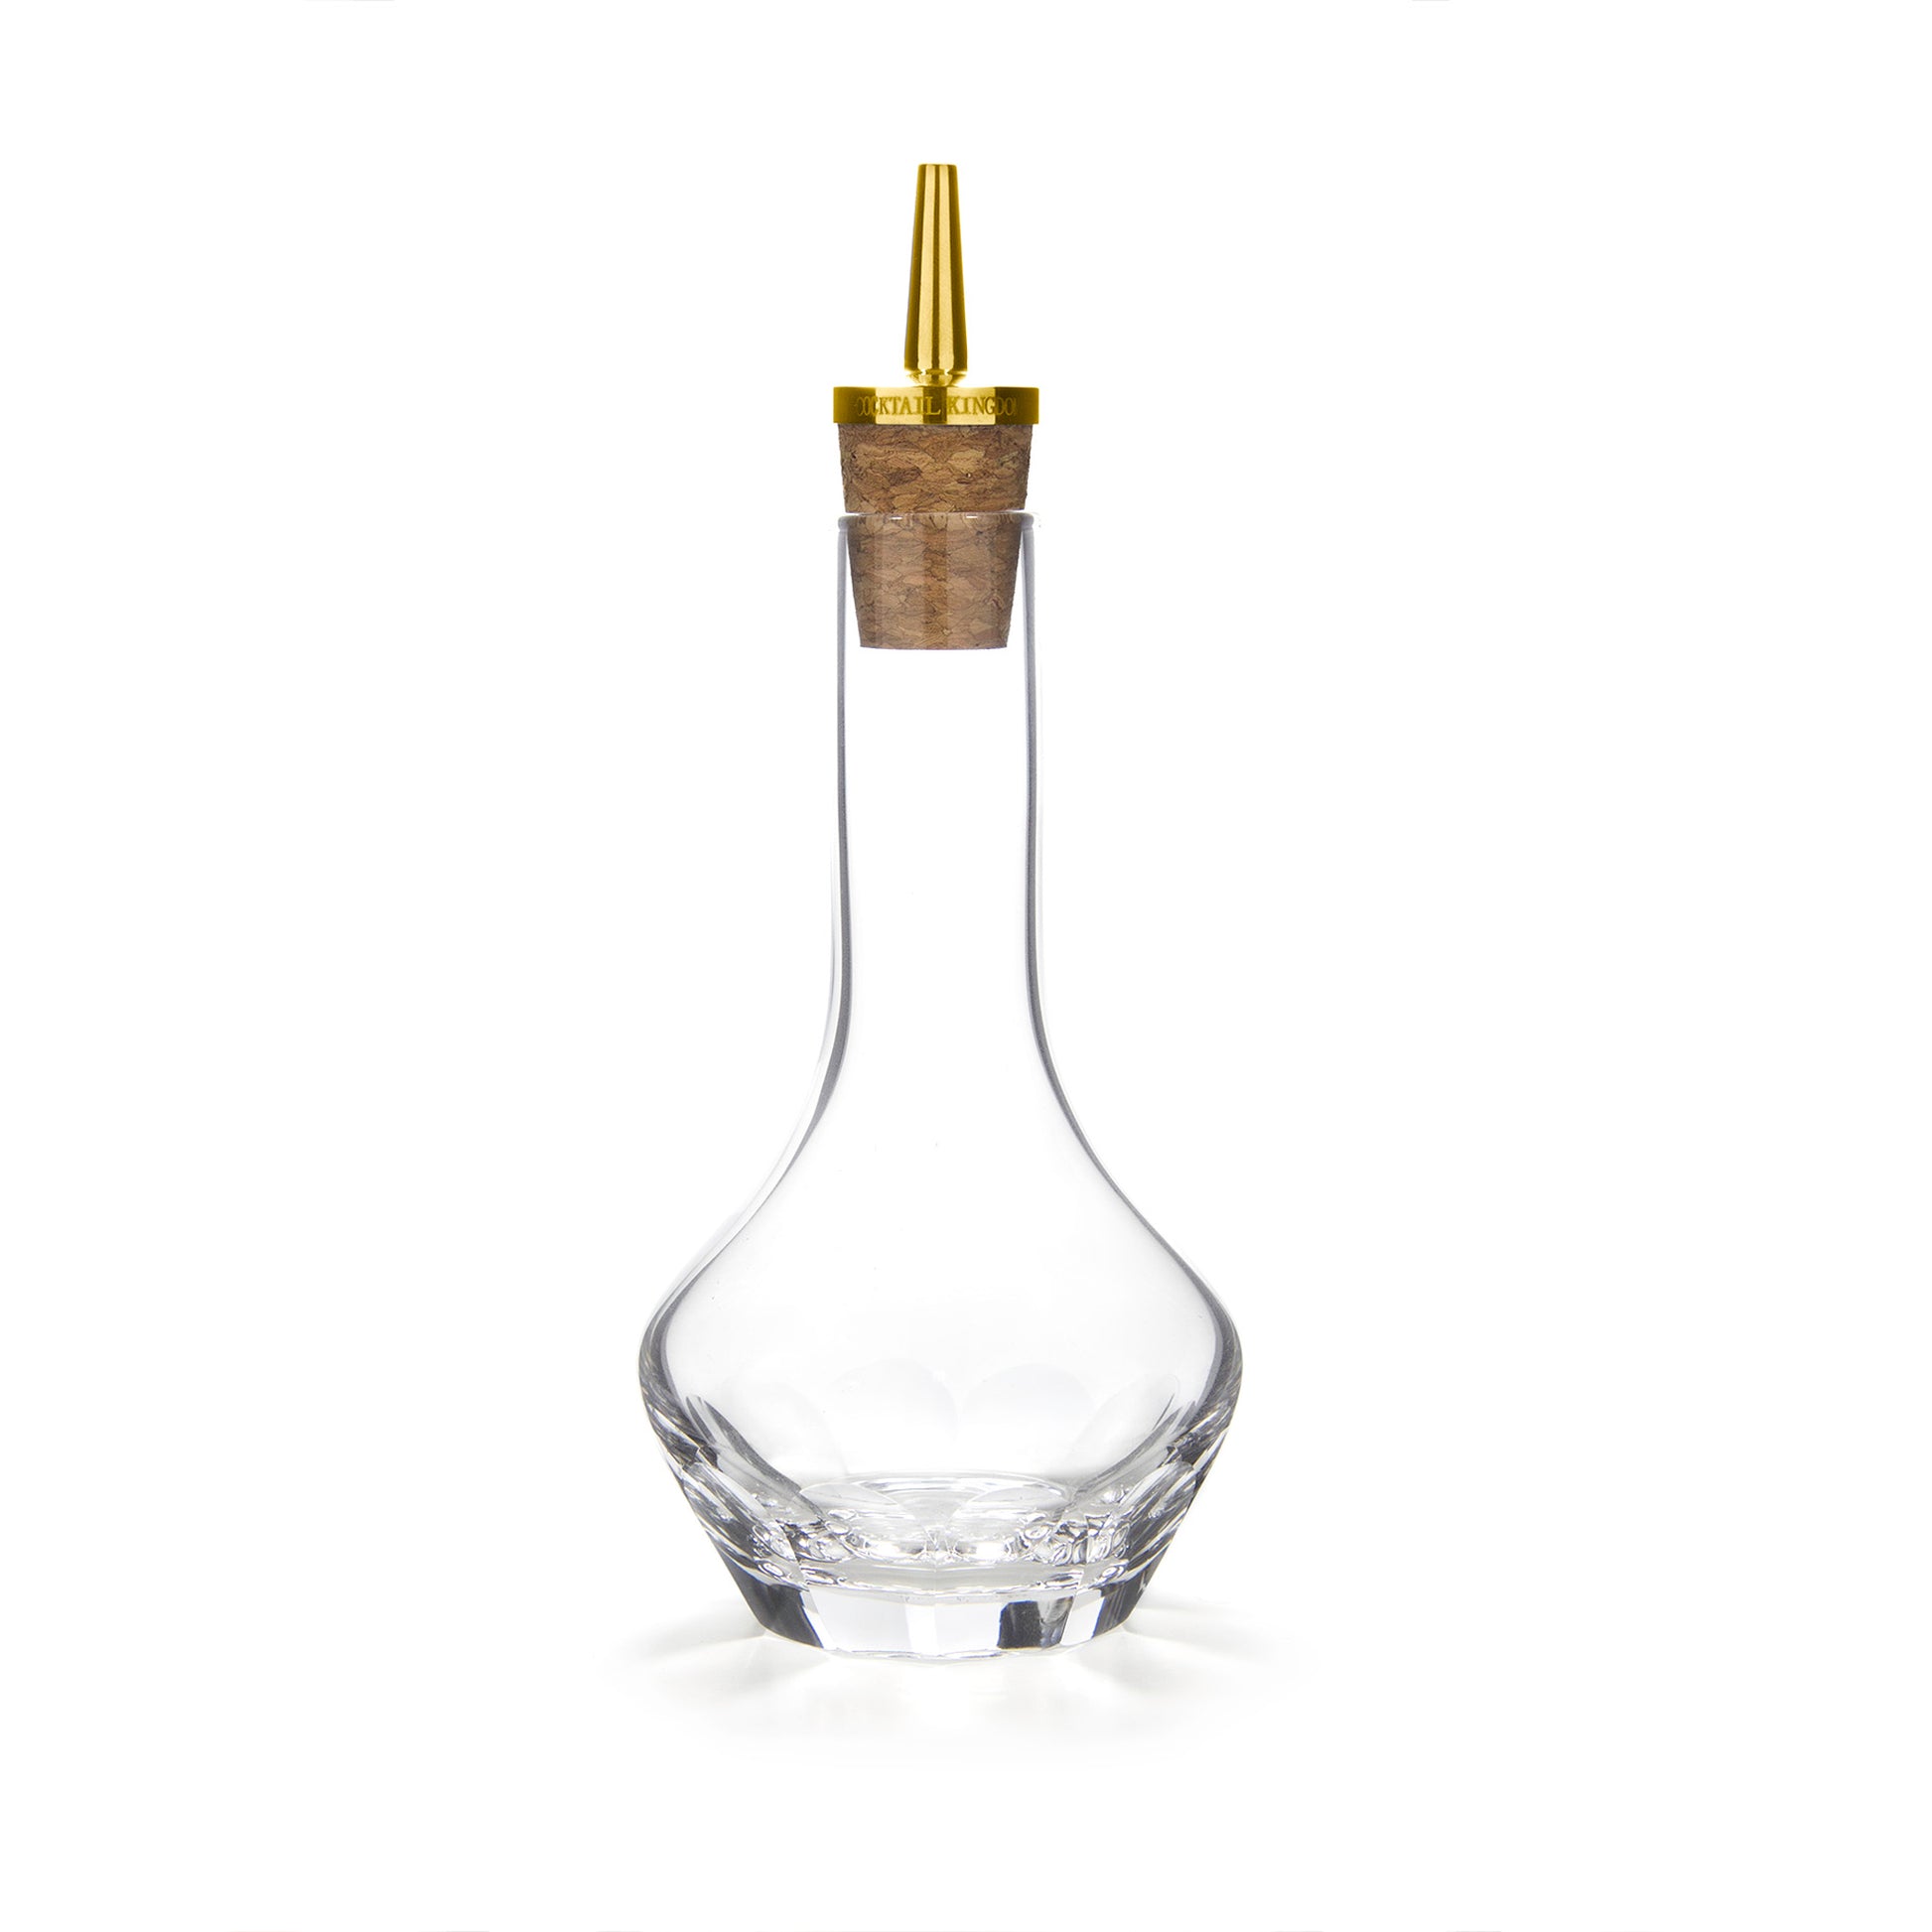 BEVELED BITTERS BOTTLE – GOLD-PLATED DASHER TOP / 100ml (3.4oz)